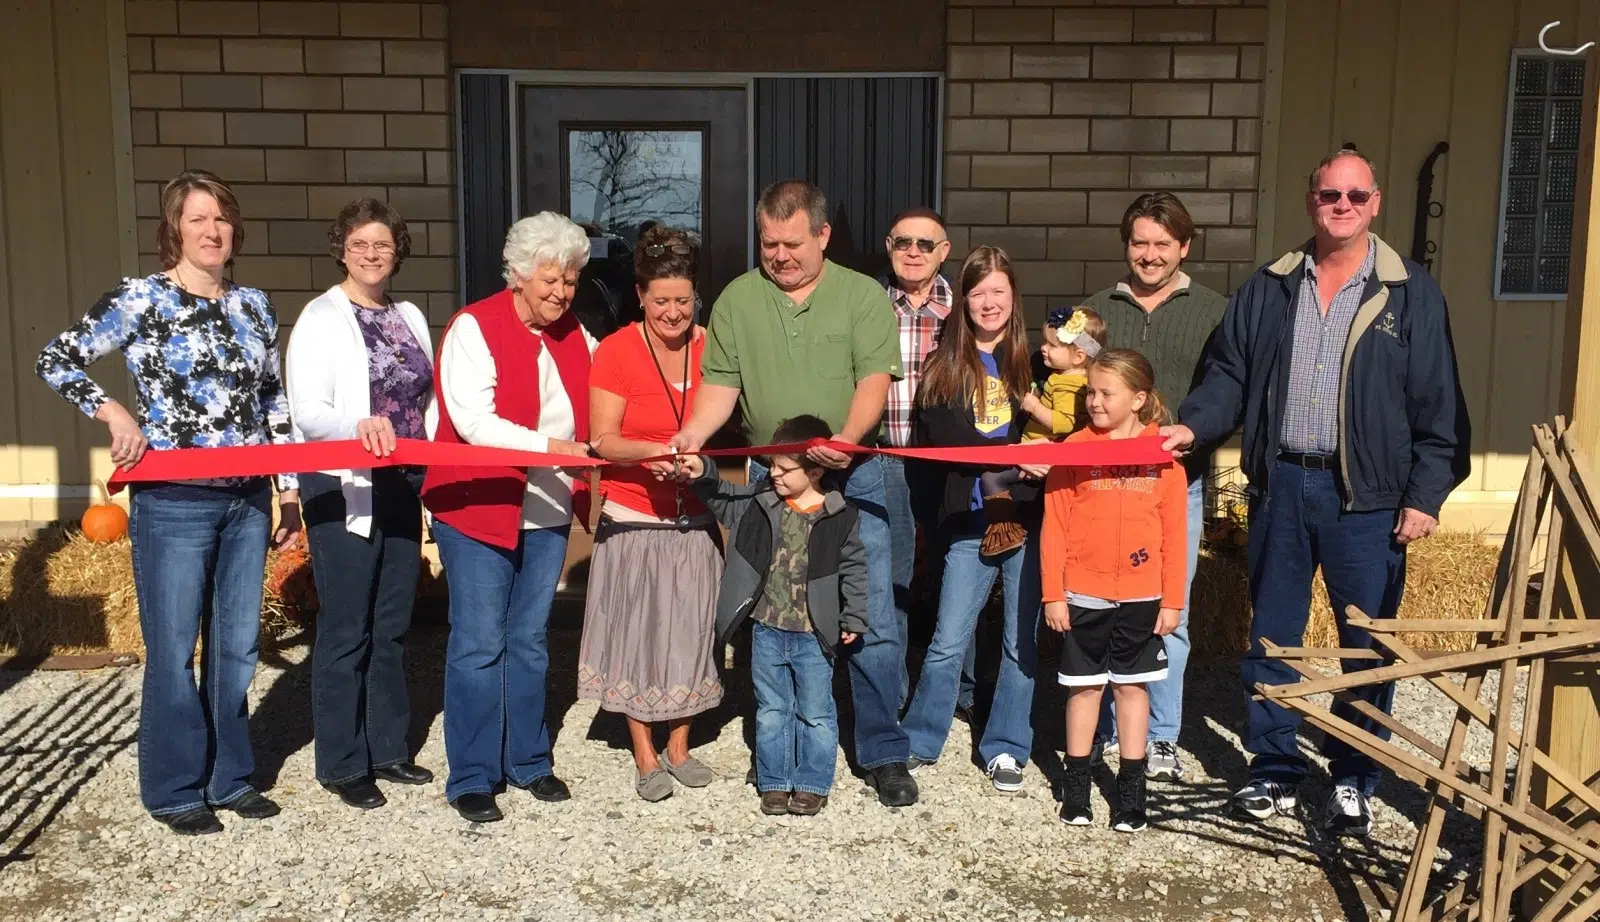 New business officially opens in Brownstown 